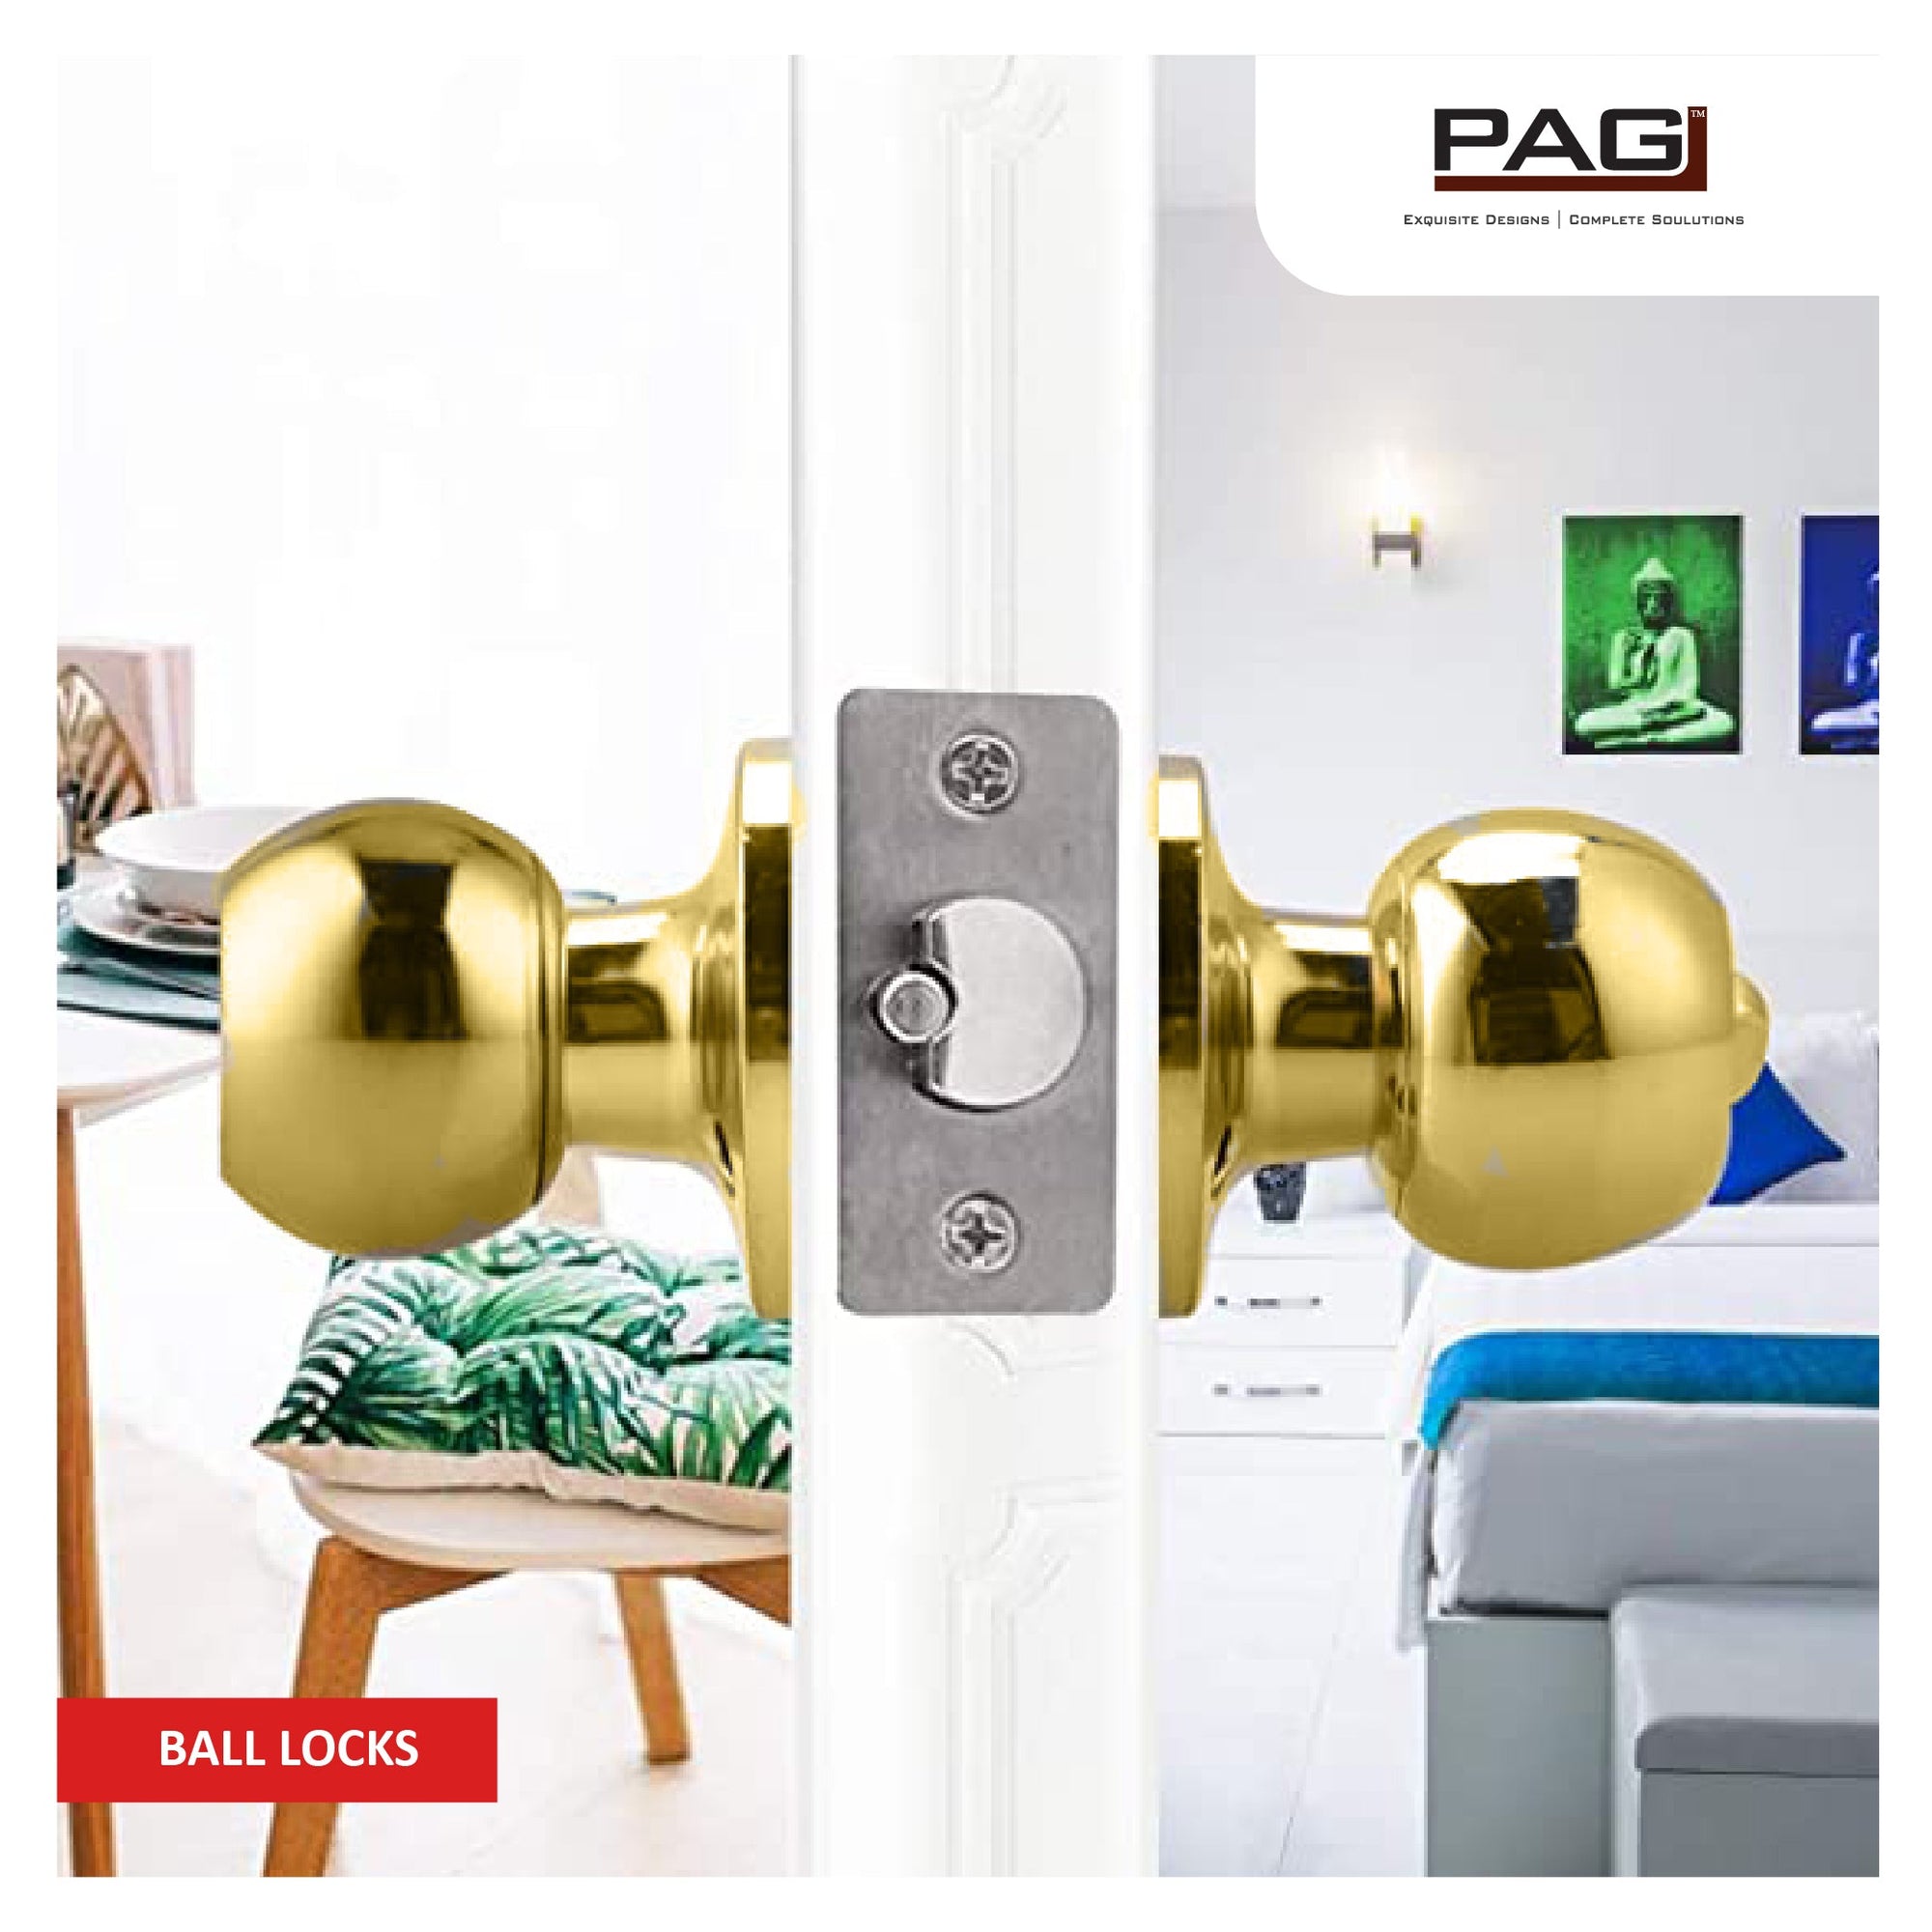 PAG Ball Locks - High-quality, reliable ball locks for ultimate door security.